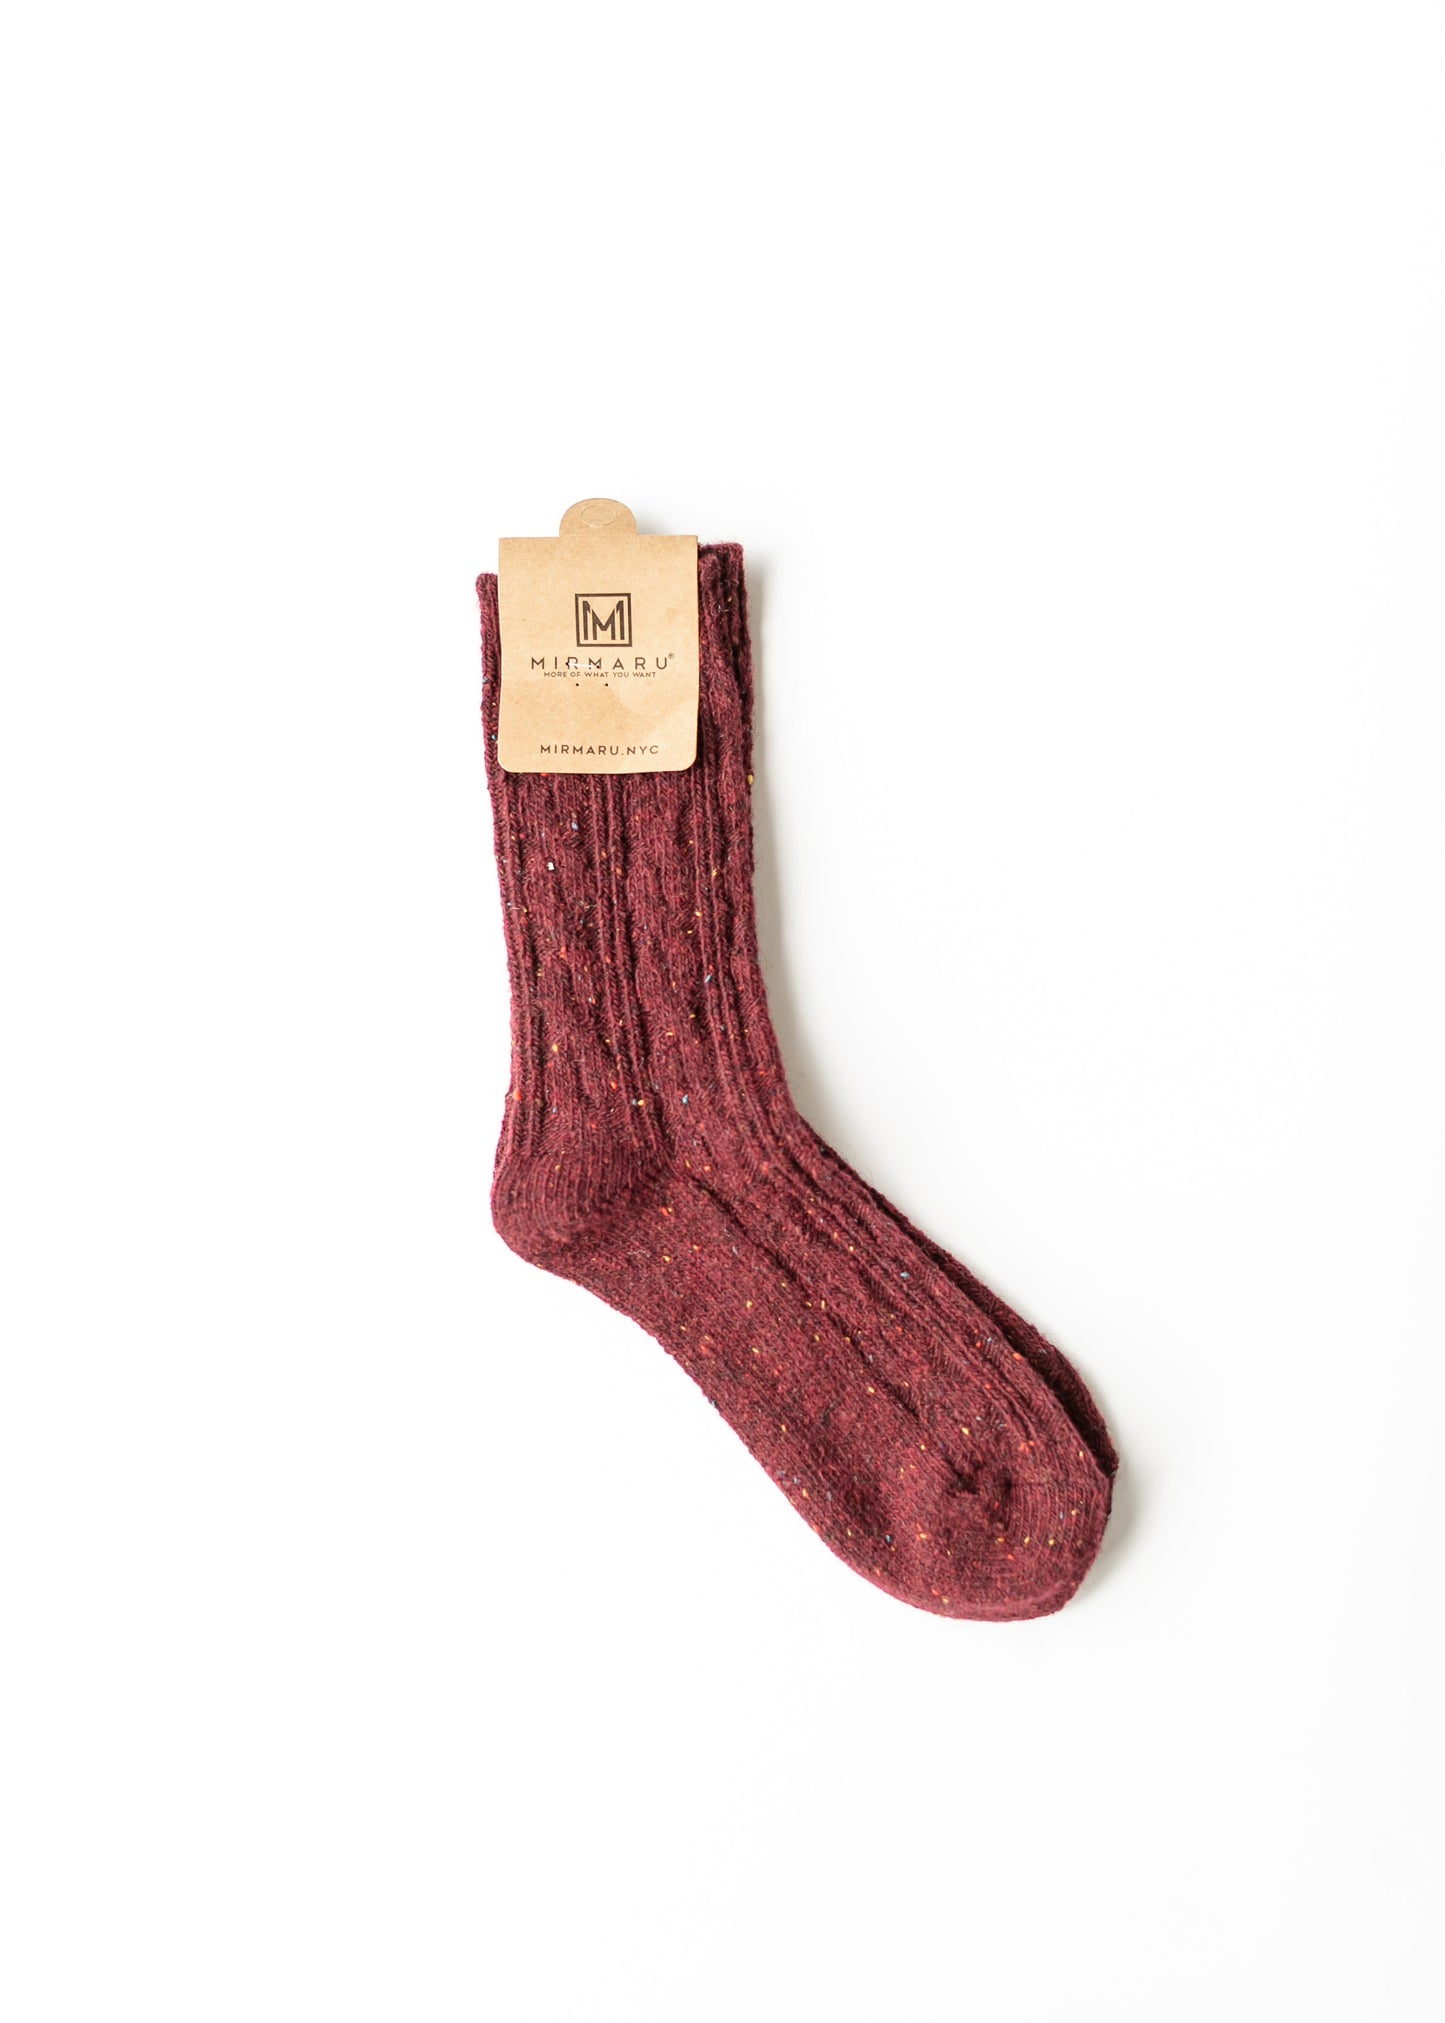 Wool Blend Crew Length Socks Accessories Speckled / Red